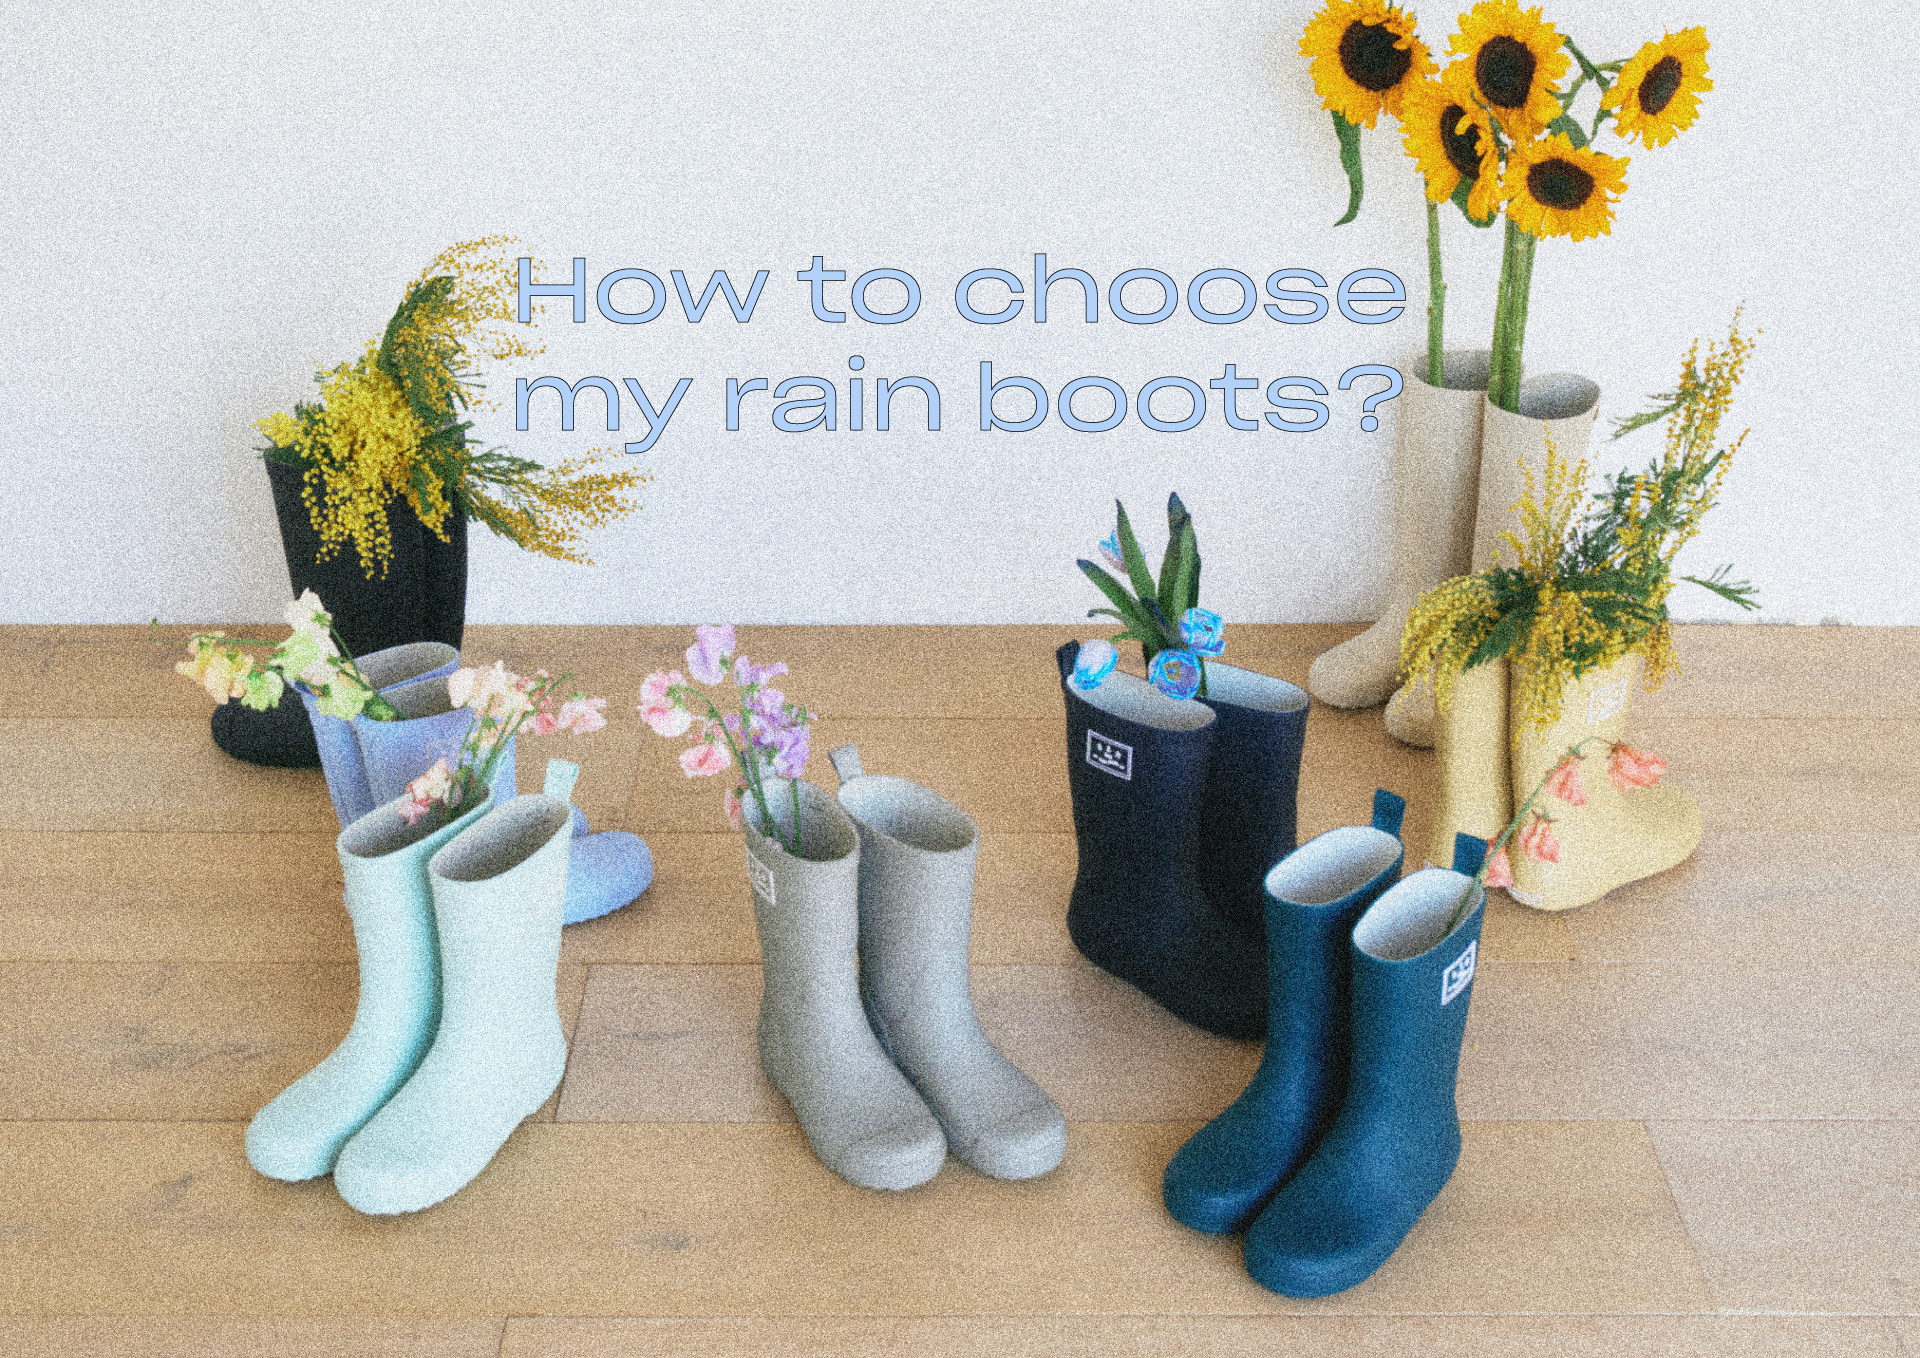 How to choose my rain boots?